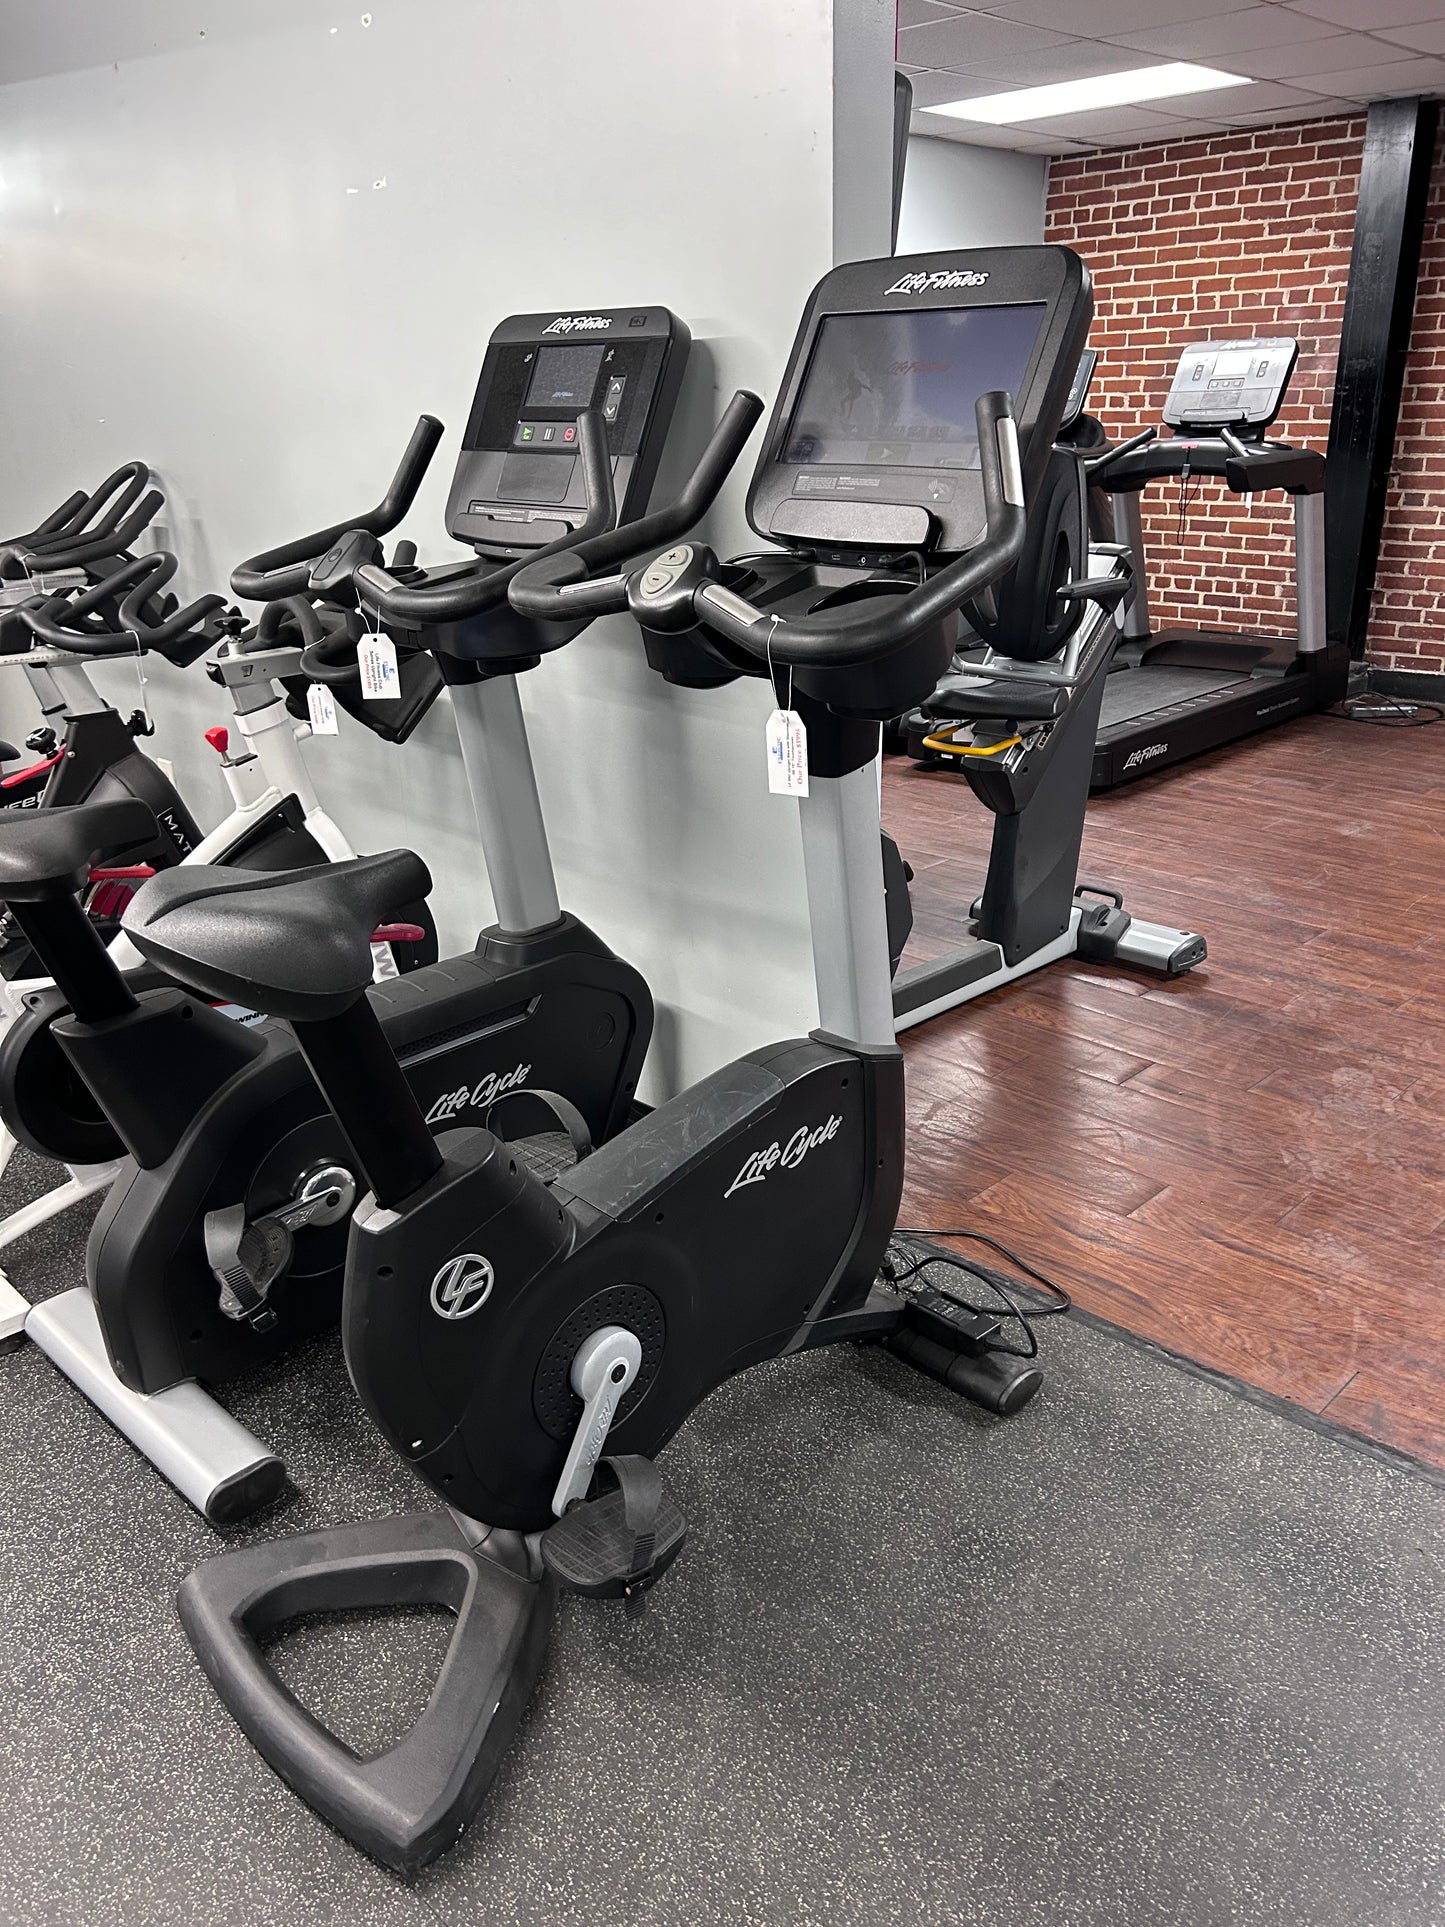 Pre-Owned Life Fitness Upright Bike 9SC w/ discover SE 15" Touchscreen - ExerciseUnlimited